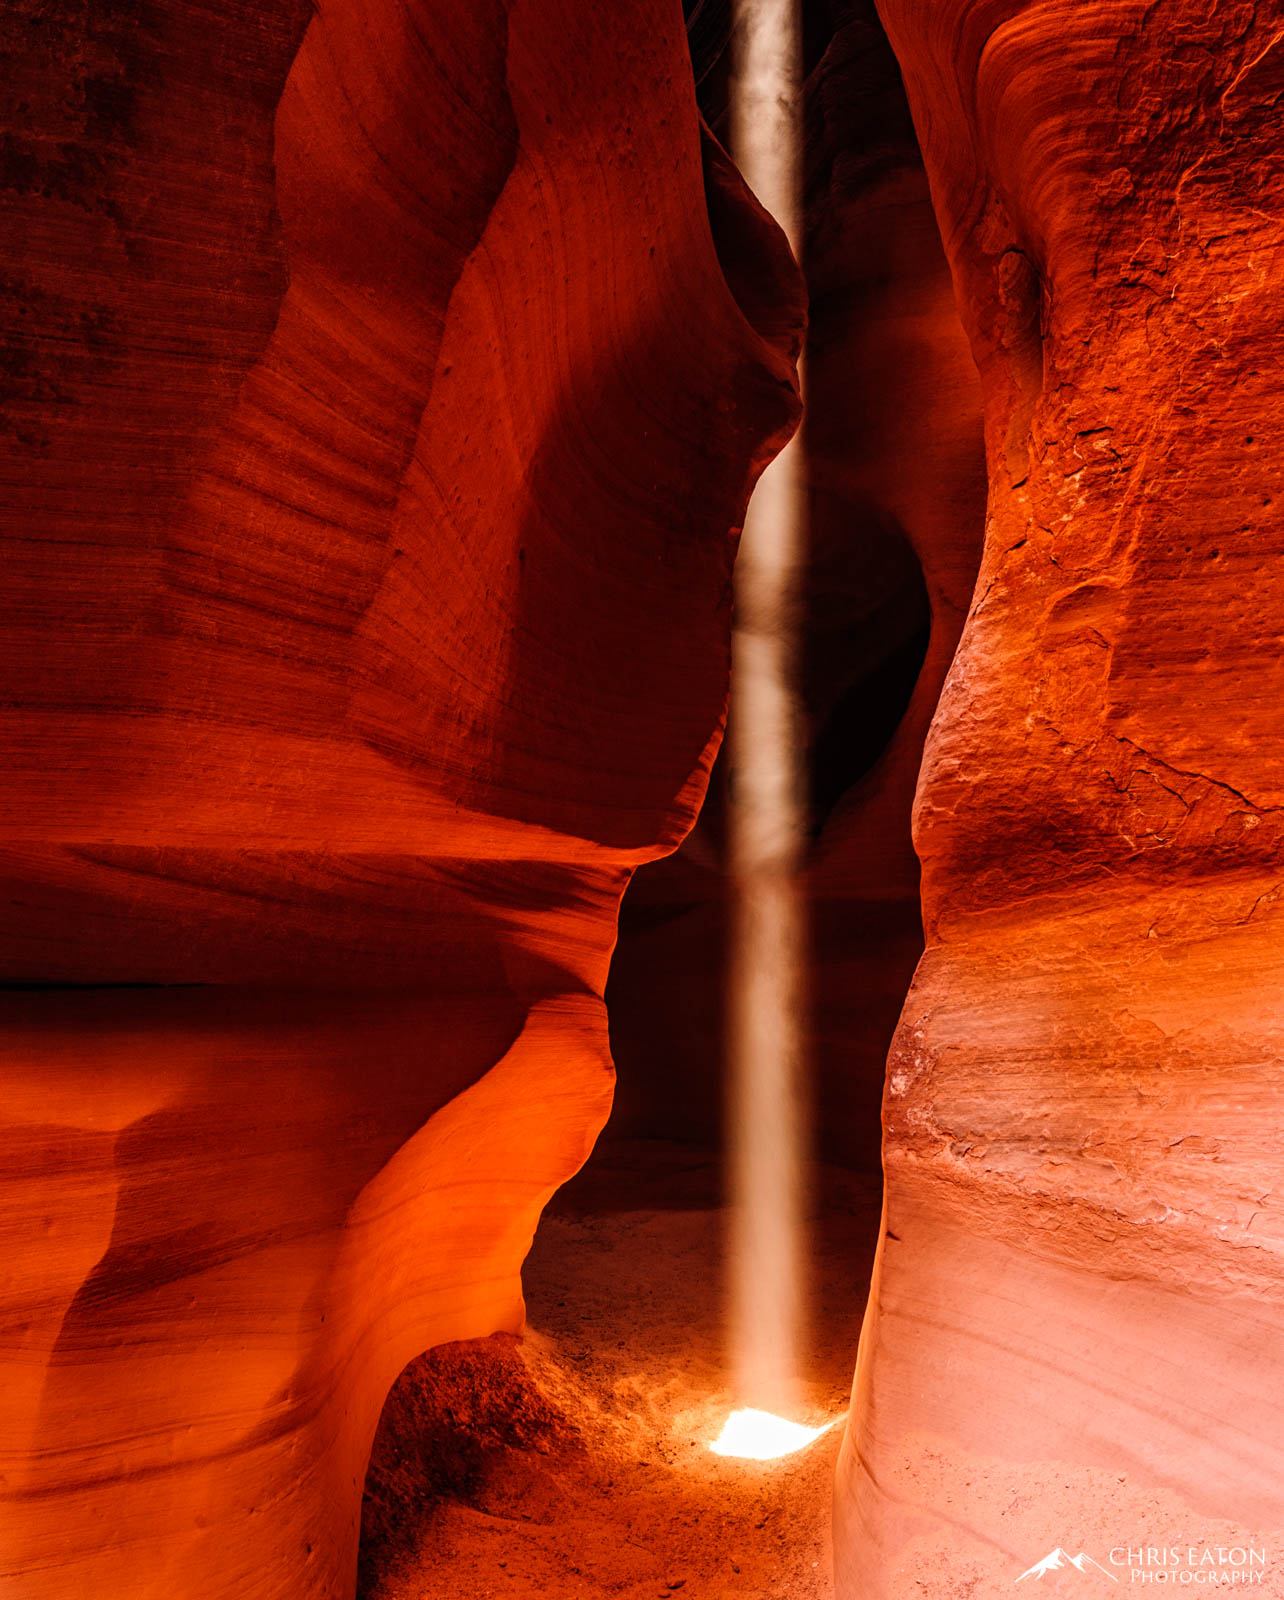 In the weeks surrounding the Summer Solstice, a beam of sunlight reaches deep into the bowels of Canyon X illuminating the sculpted...